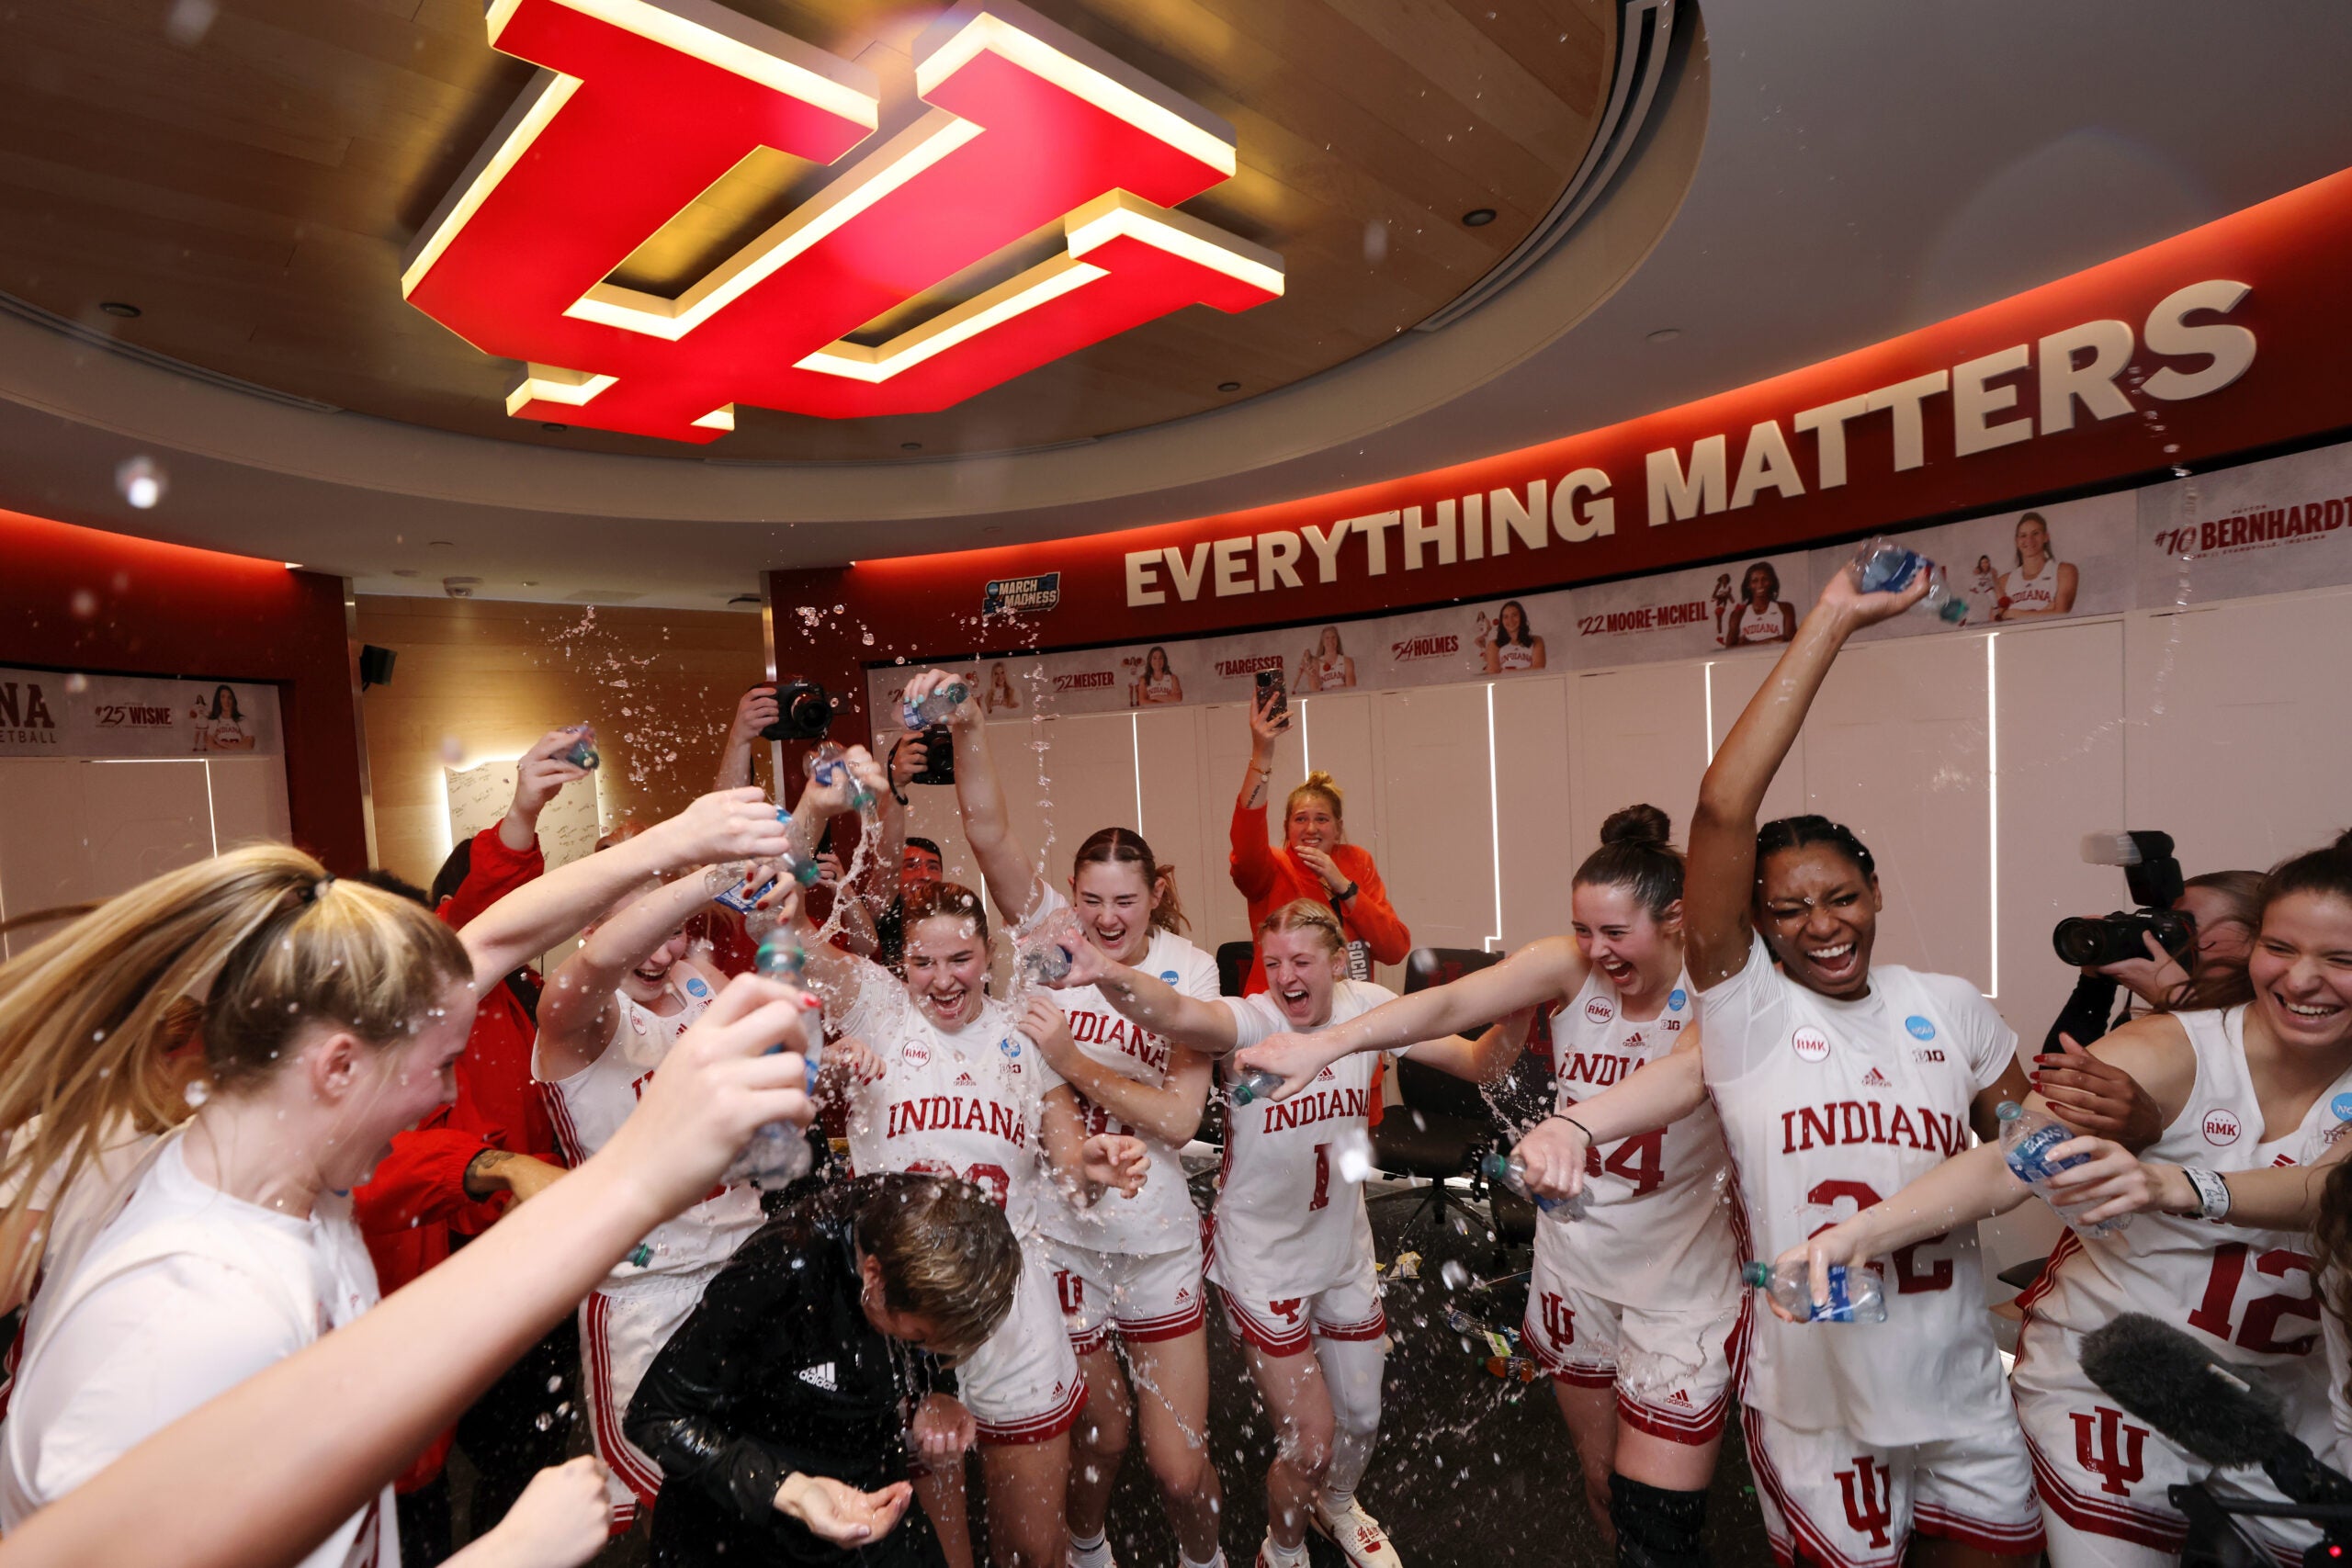 As Indiana University's women's basketball team is celebrating their trip to the Sweet Sixteen, we're taking a look at their last few NCAA tournaments.